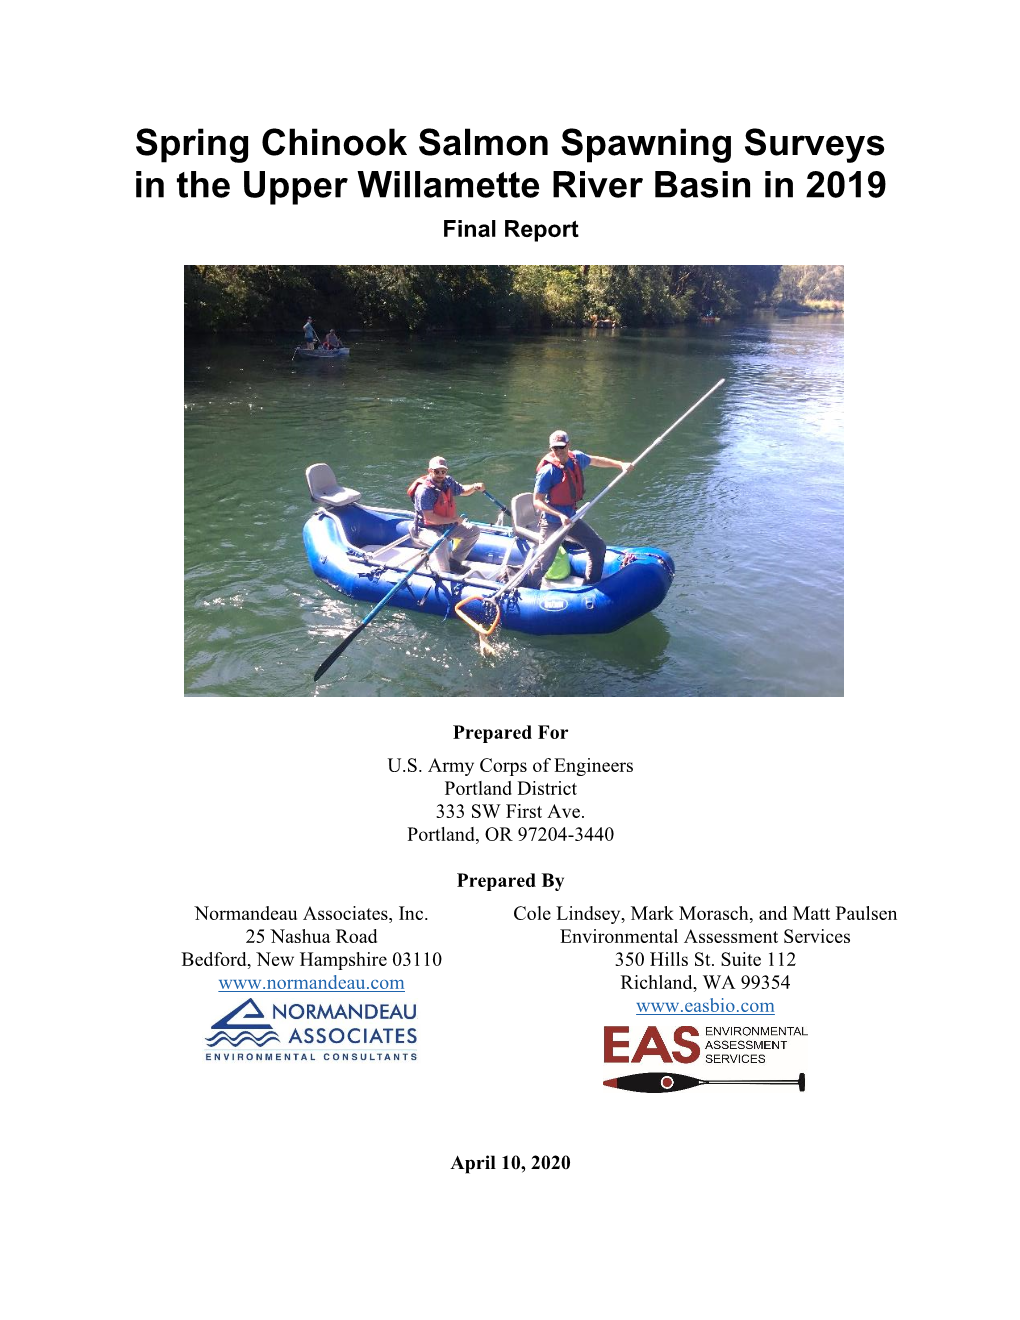 Spring Chinook Salmon Spawning Surveys in the Upper Willamette River Basin in 2019 Final Report